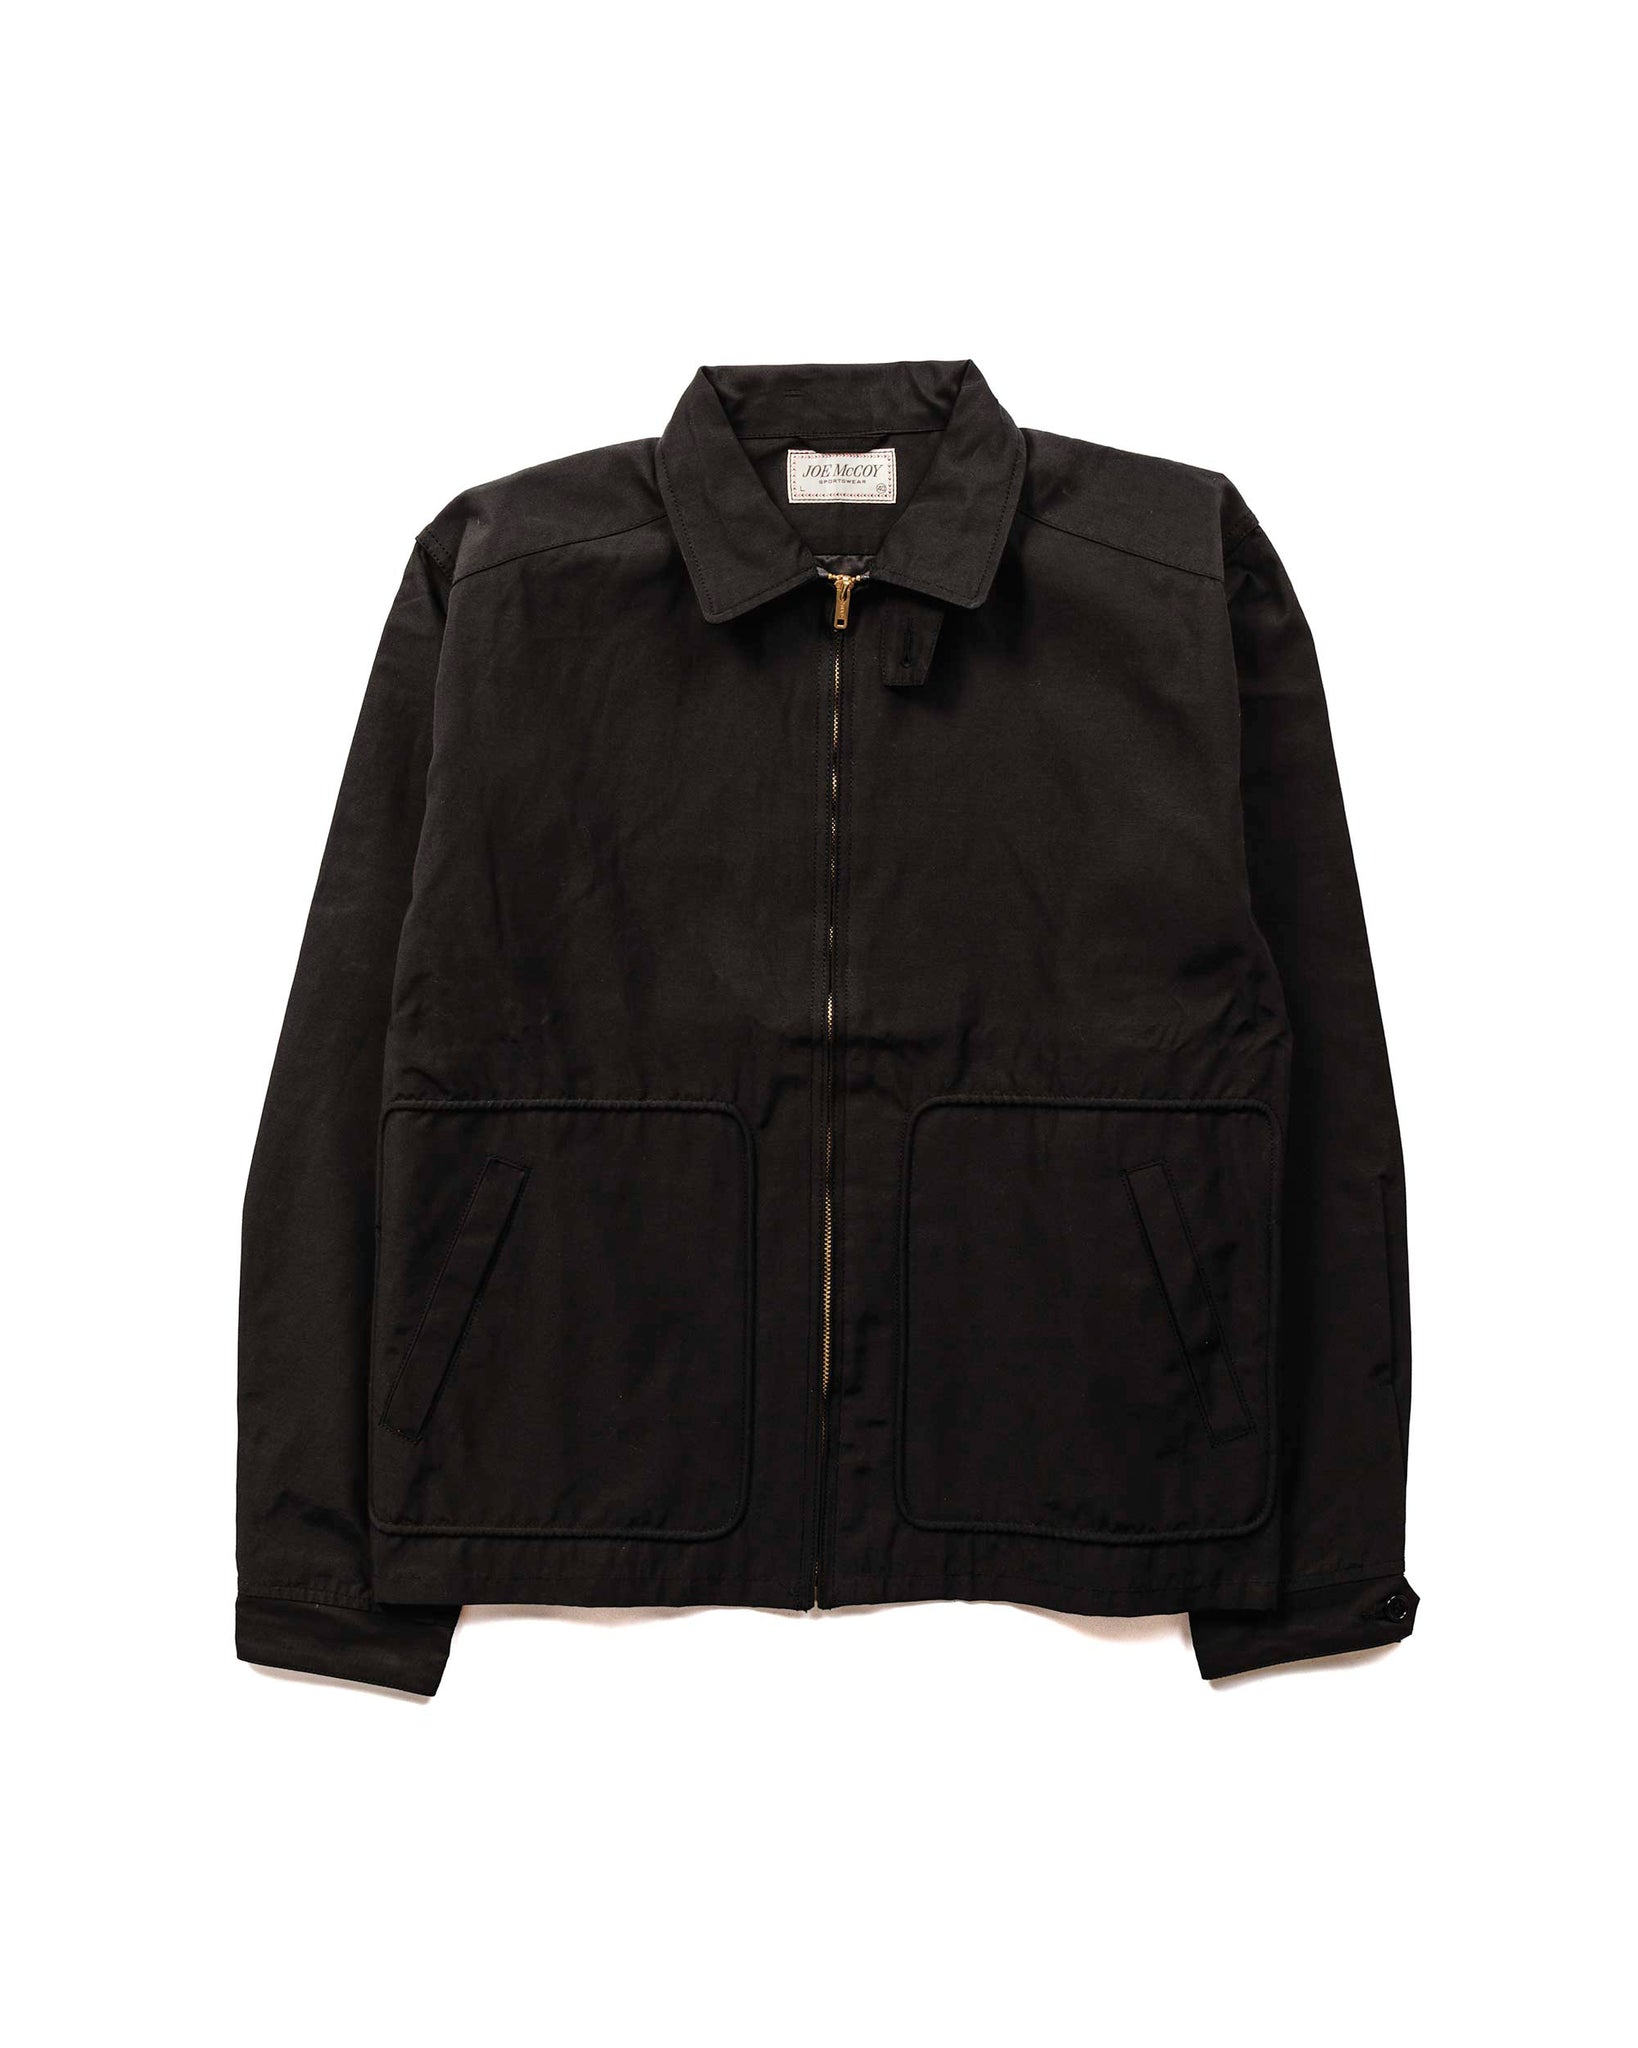 The Real McCoy's MJ23016 All-Weather Swing Jacket Black